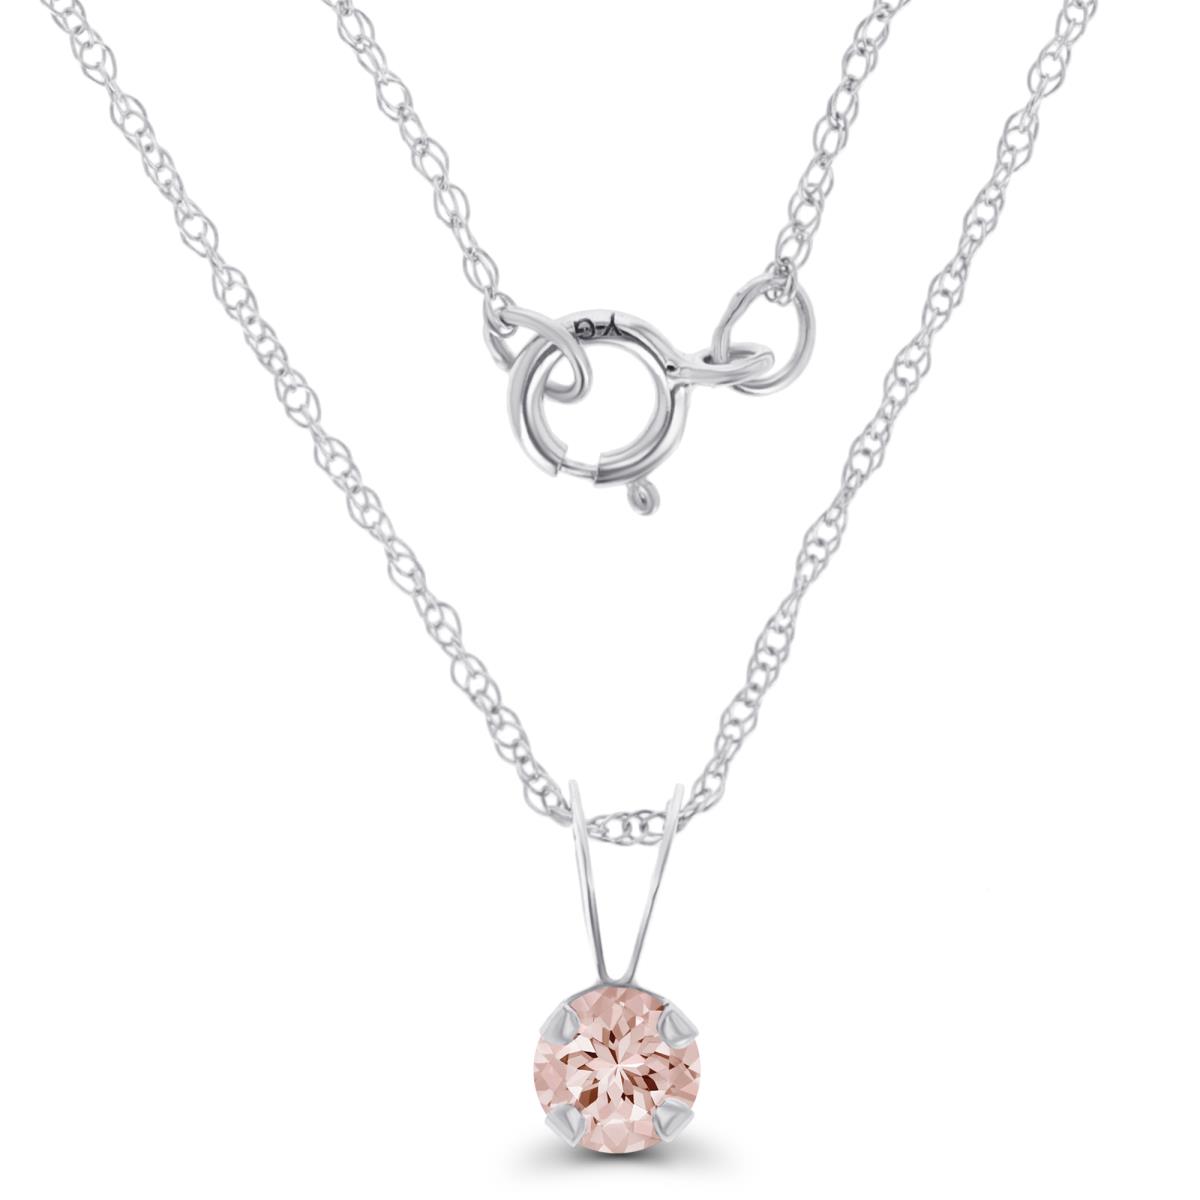 14K White Gold 4mm Round Morganite 18" Rope Chain Necklace